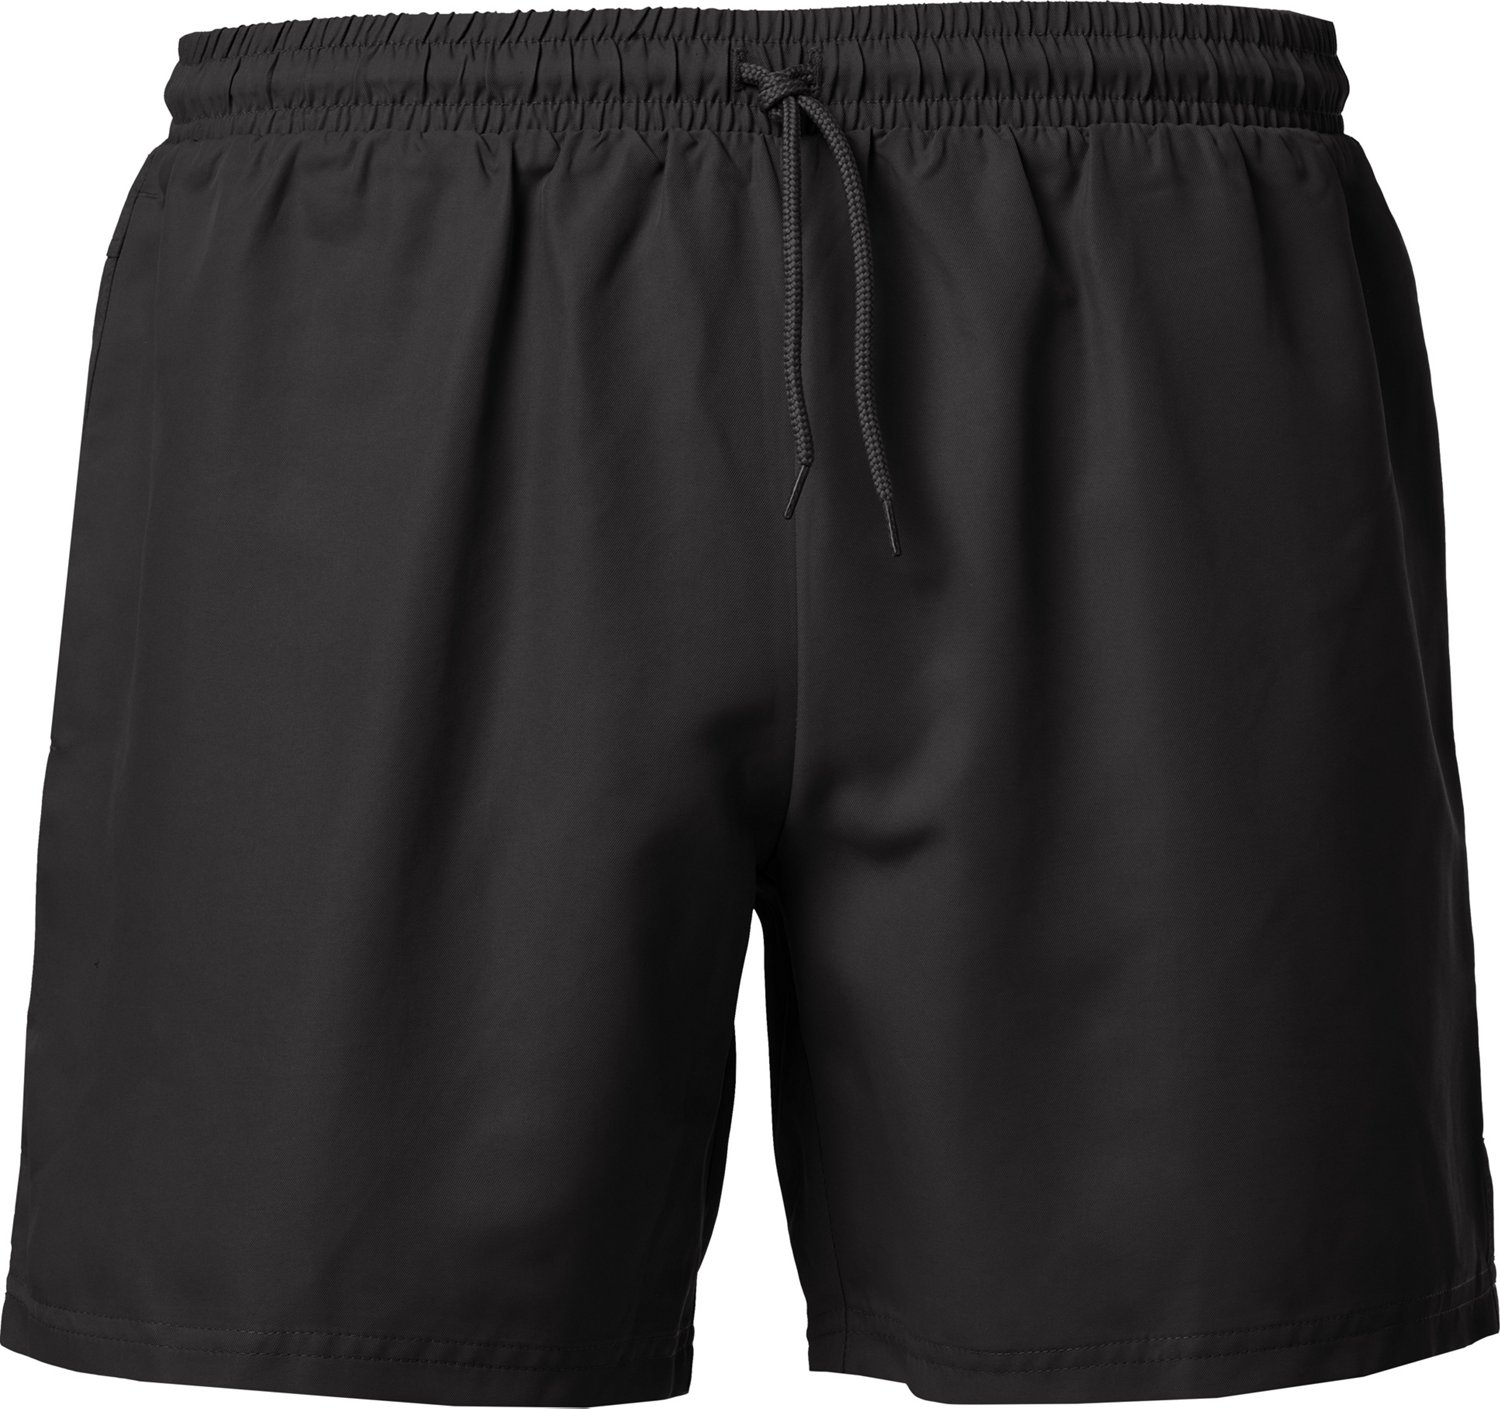 Men's Tall Mesh Basketball Shorts With Tape